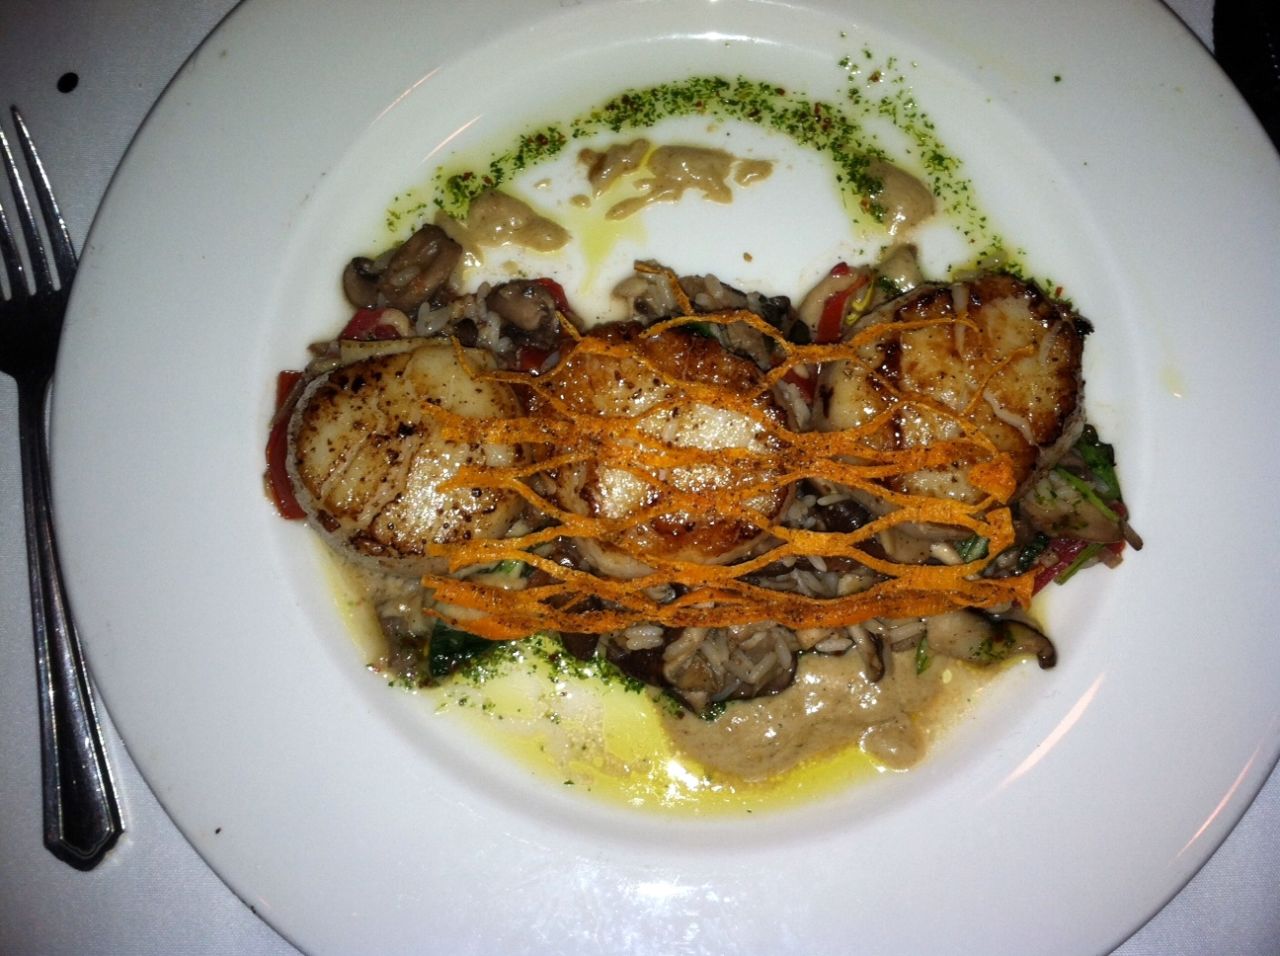 "The jumbo sea scallops at Commander's Palace are to die for!" wrote iReporter Sonia Garza of Pasadena, Texas.